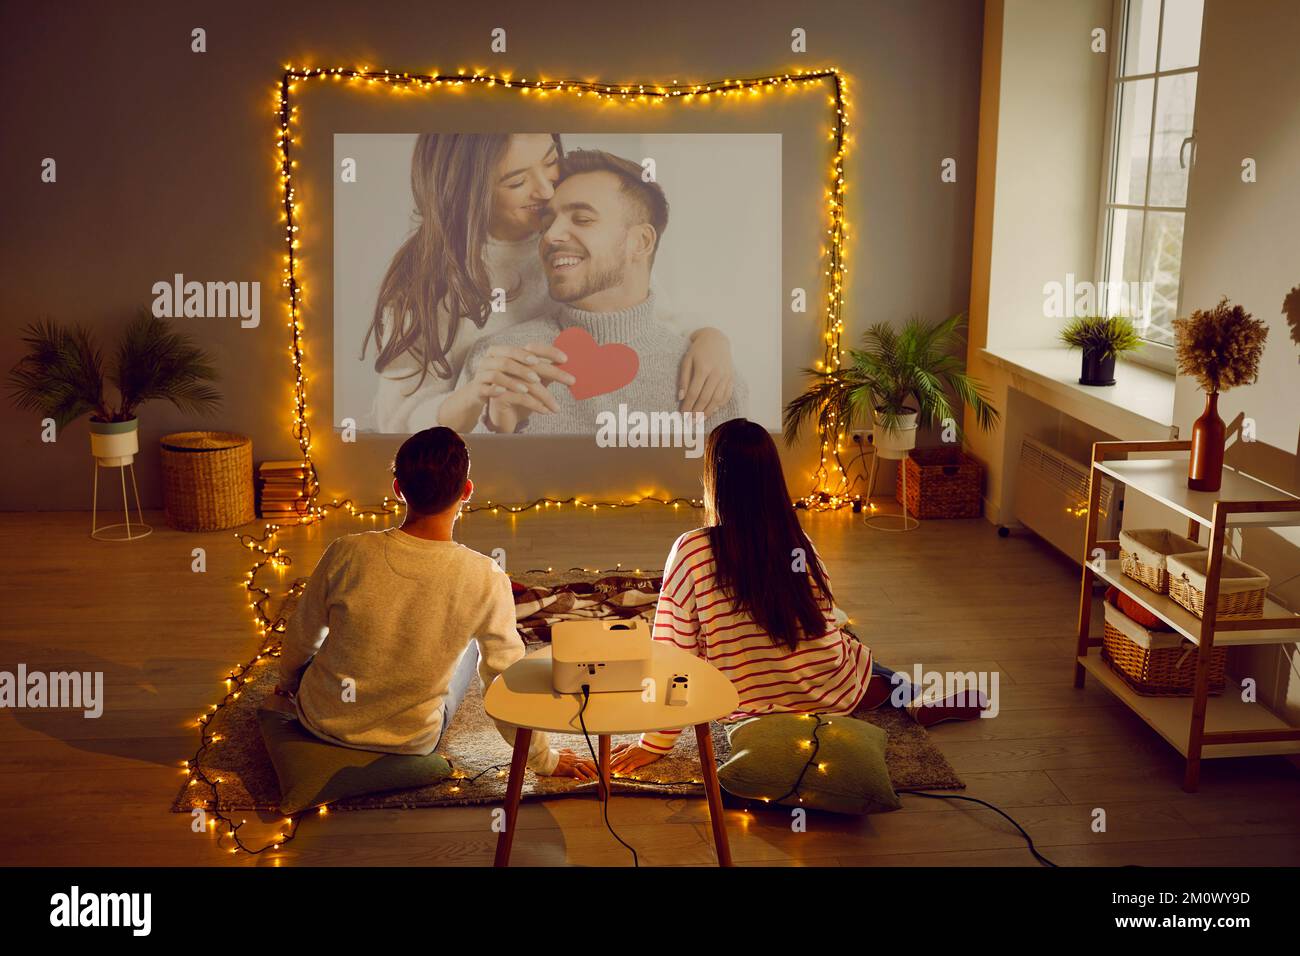 Couple having Valentine's date at home, using projector, watching movie or looking at photos Stock Photo